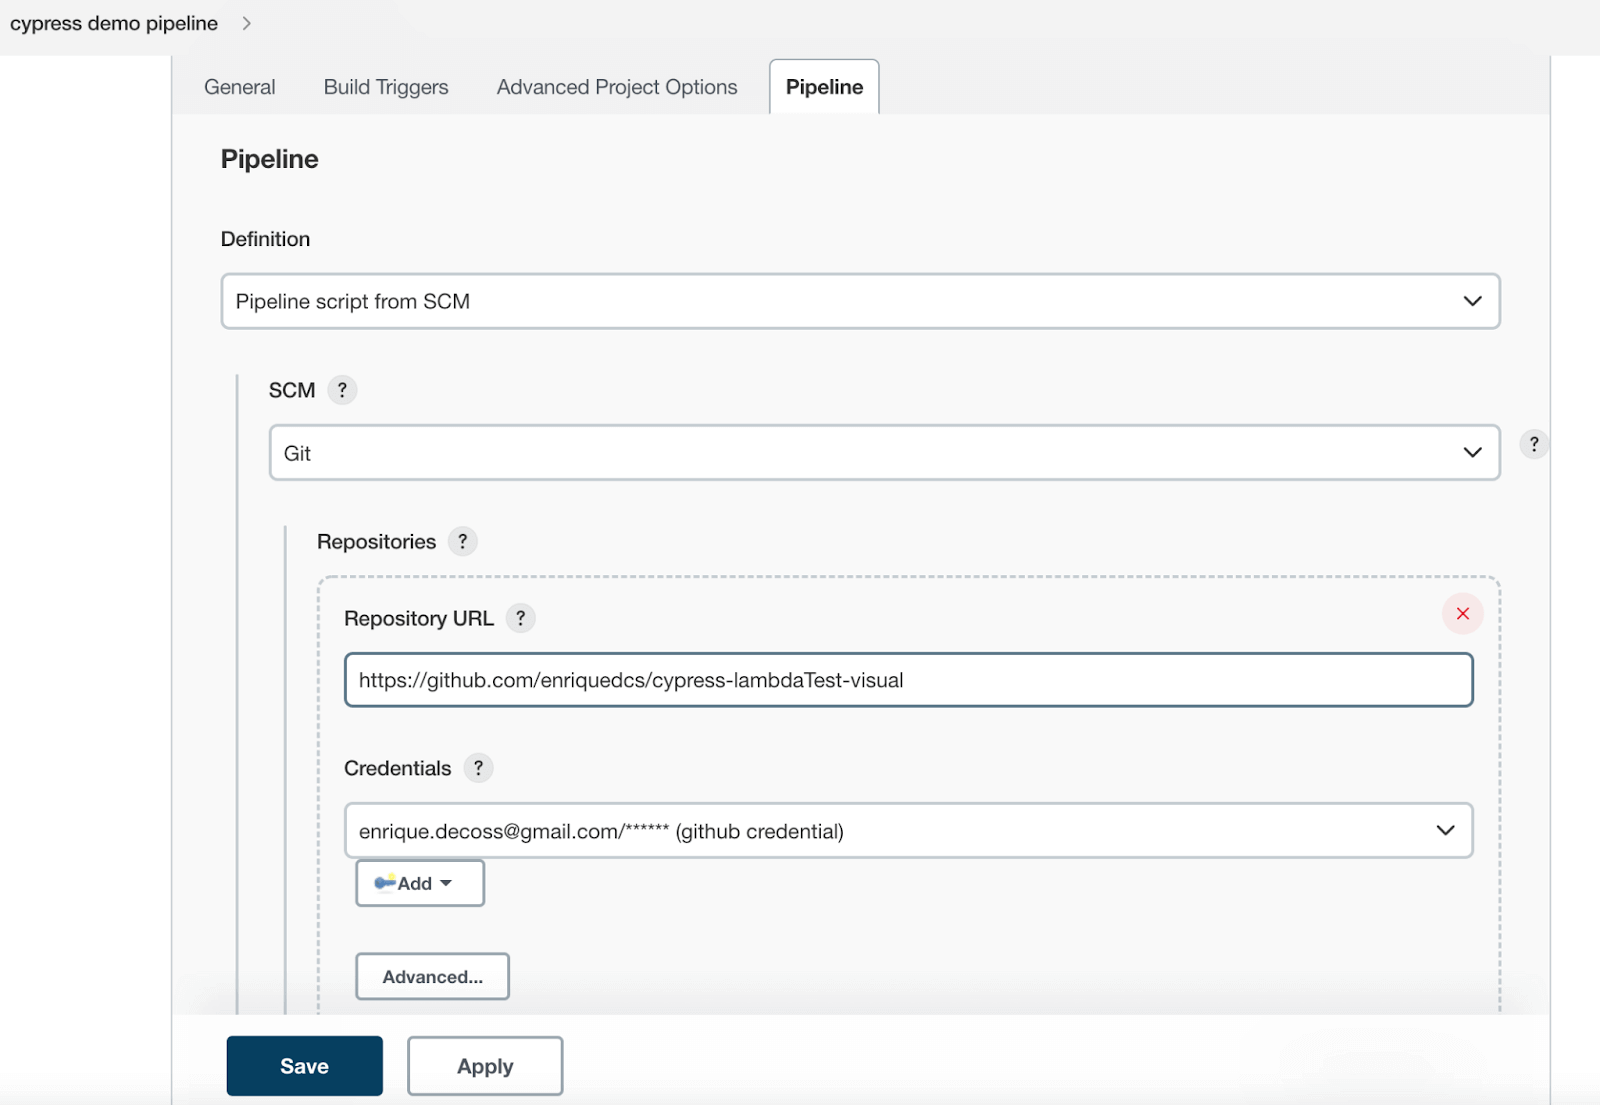 Scroll down to Pipeline Options 